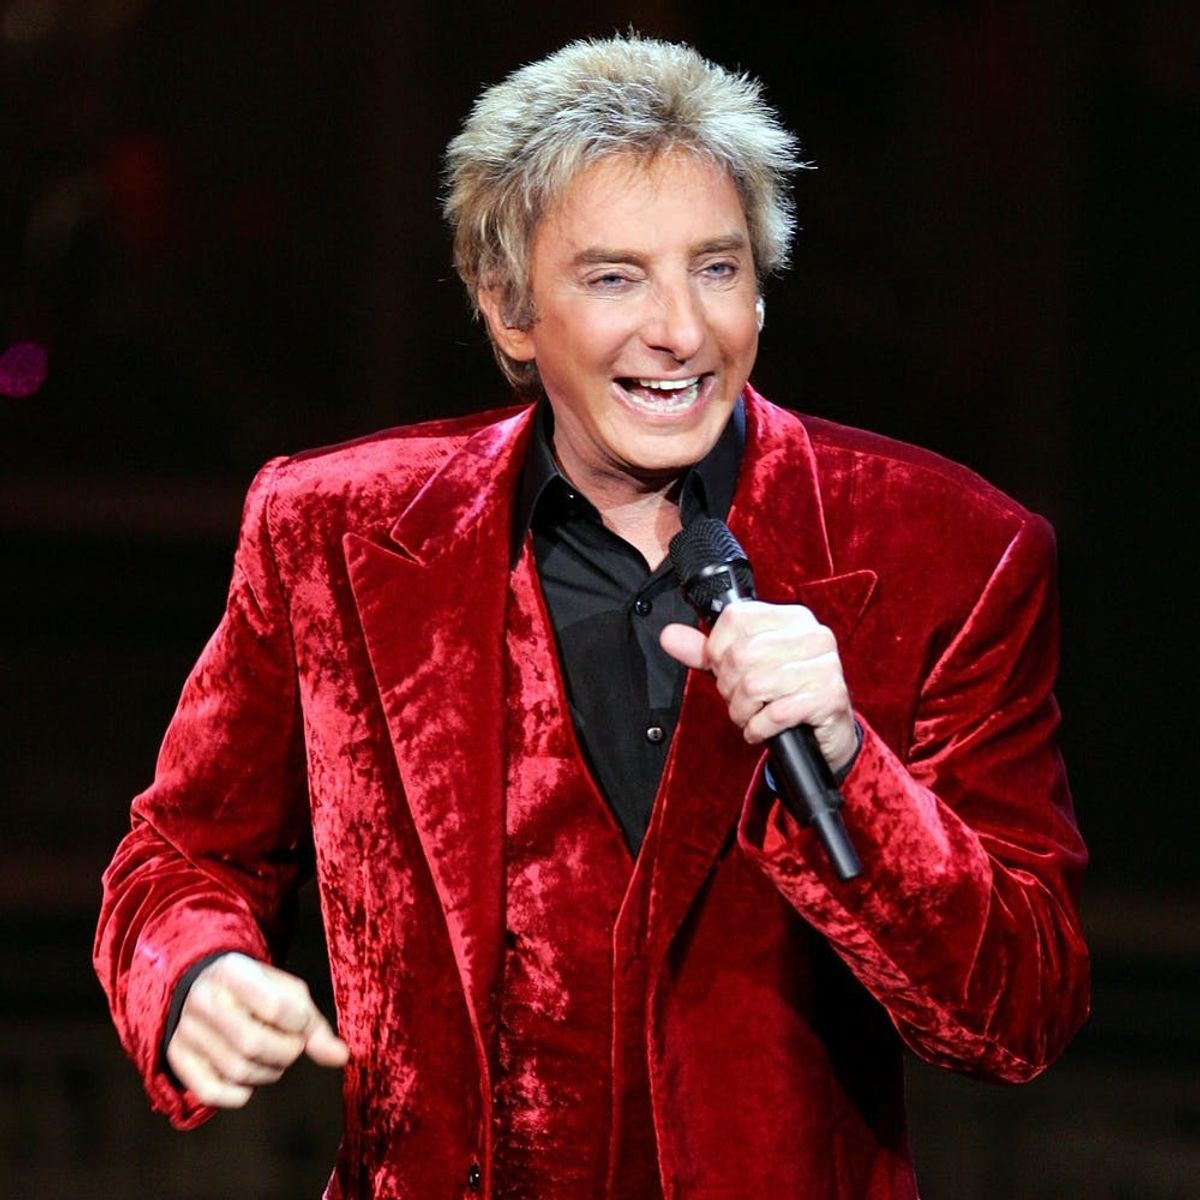 The Heartbreaking Reason Barry Manilow Waited to Publicly Come Out